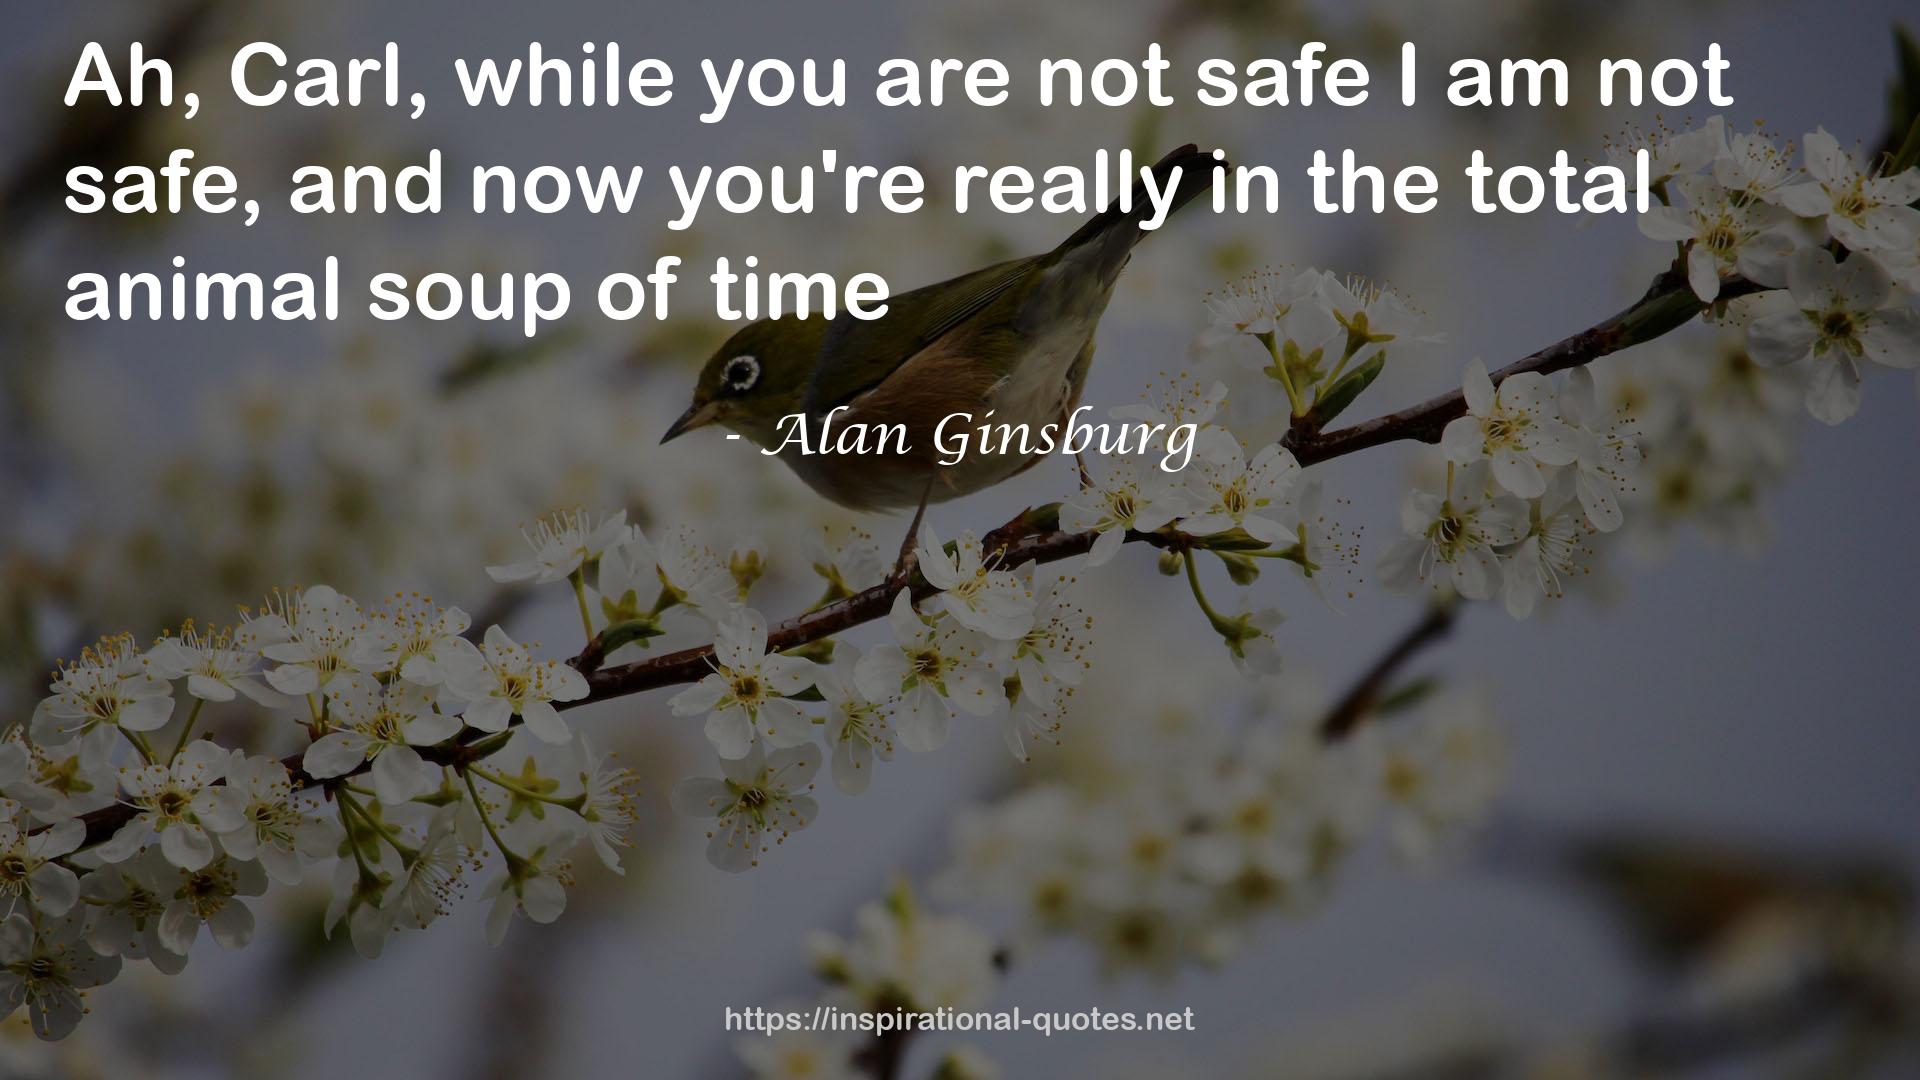 Alan Ginsburg QUOTES